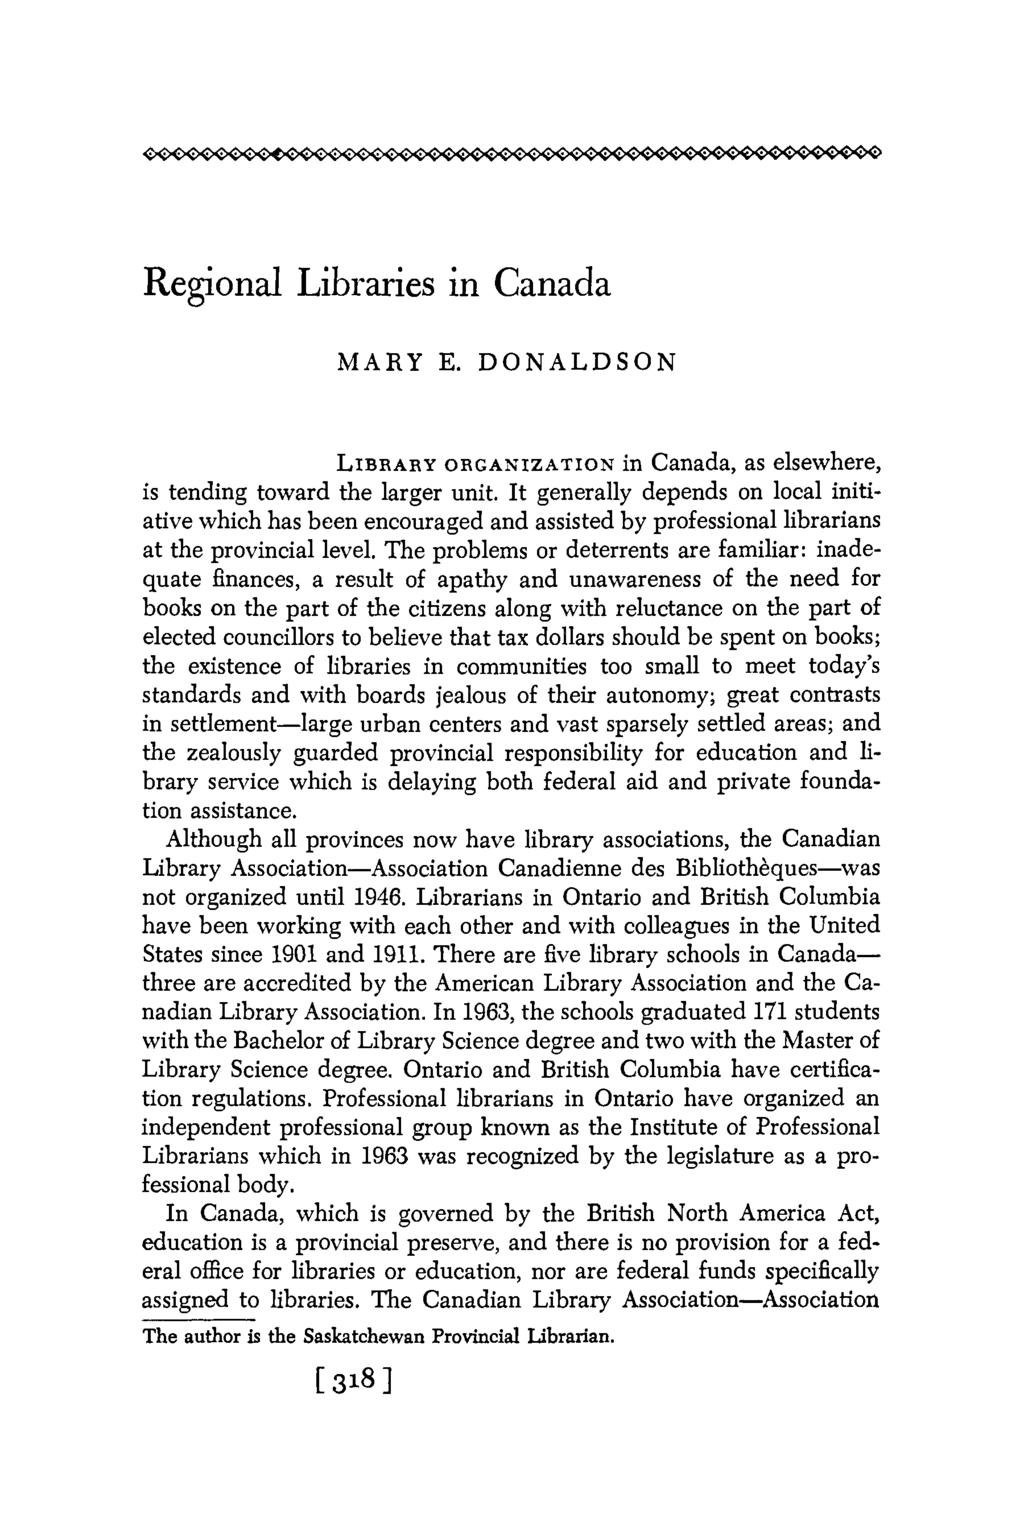 Regional Libraries in Canada MARY E. DONALDSON LIBRARYORGANIZATION in Canada, as elsewhere, is tending toward the larger unit.